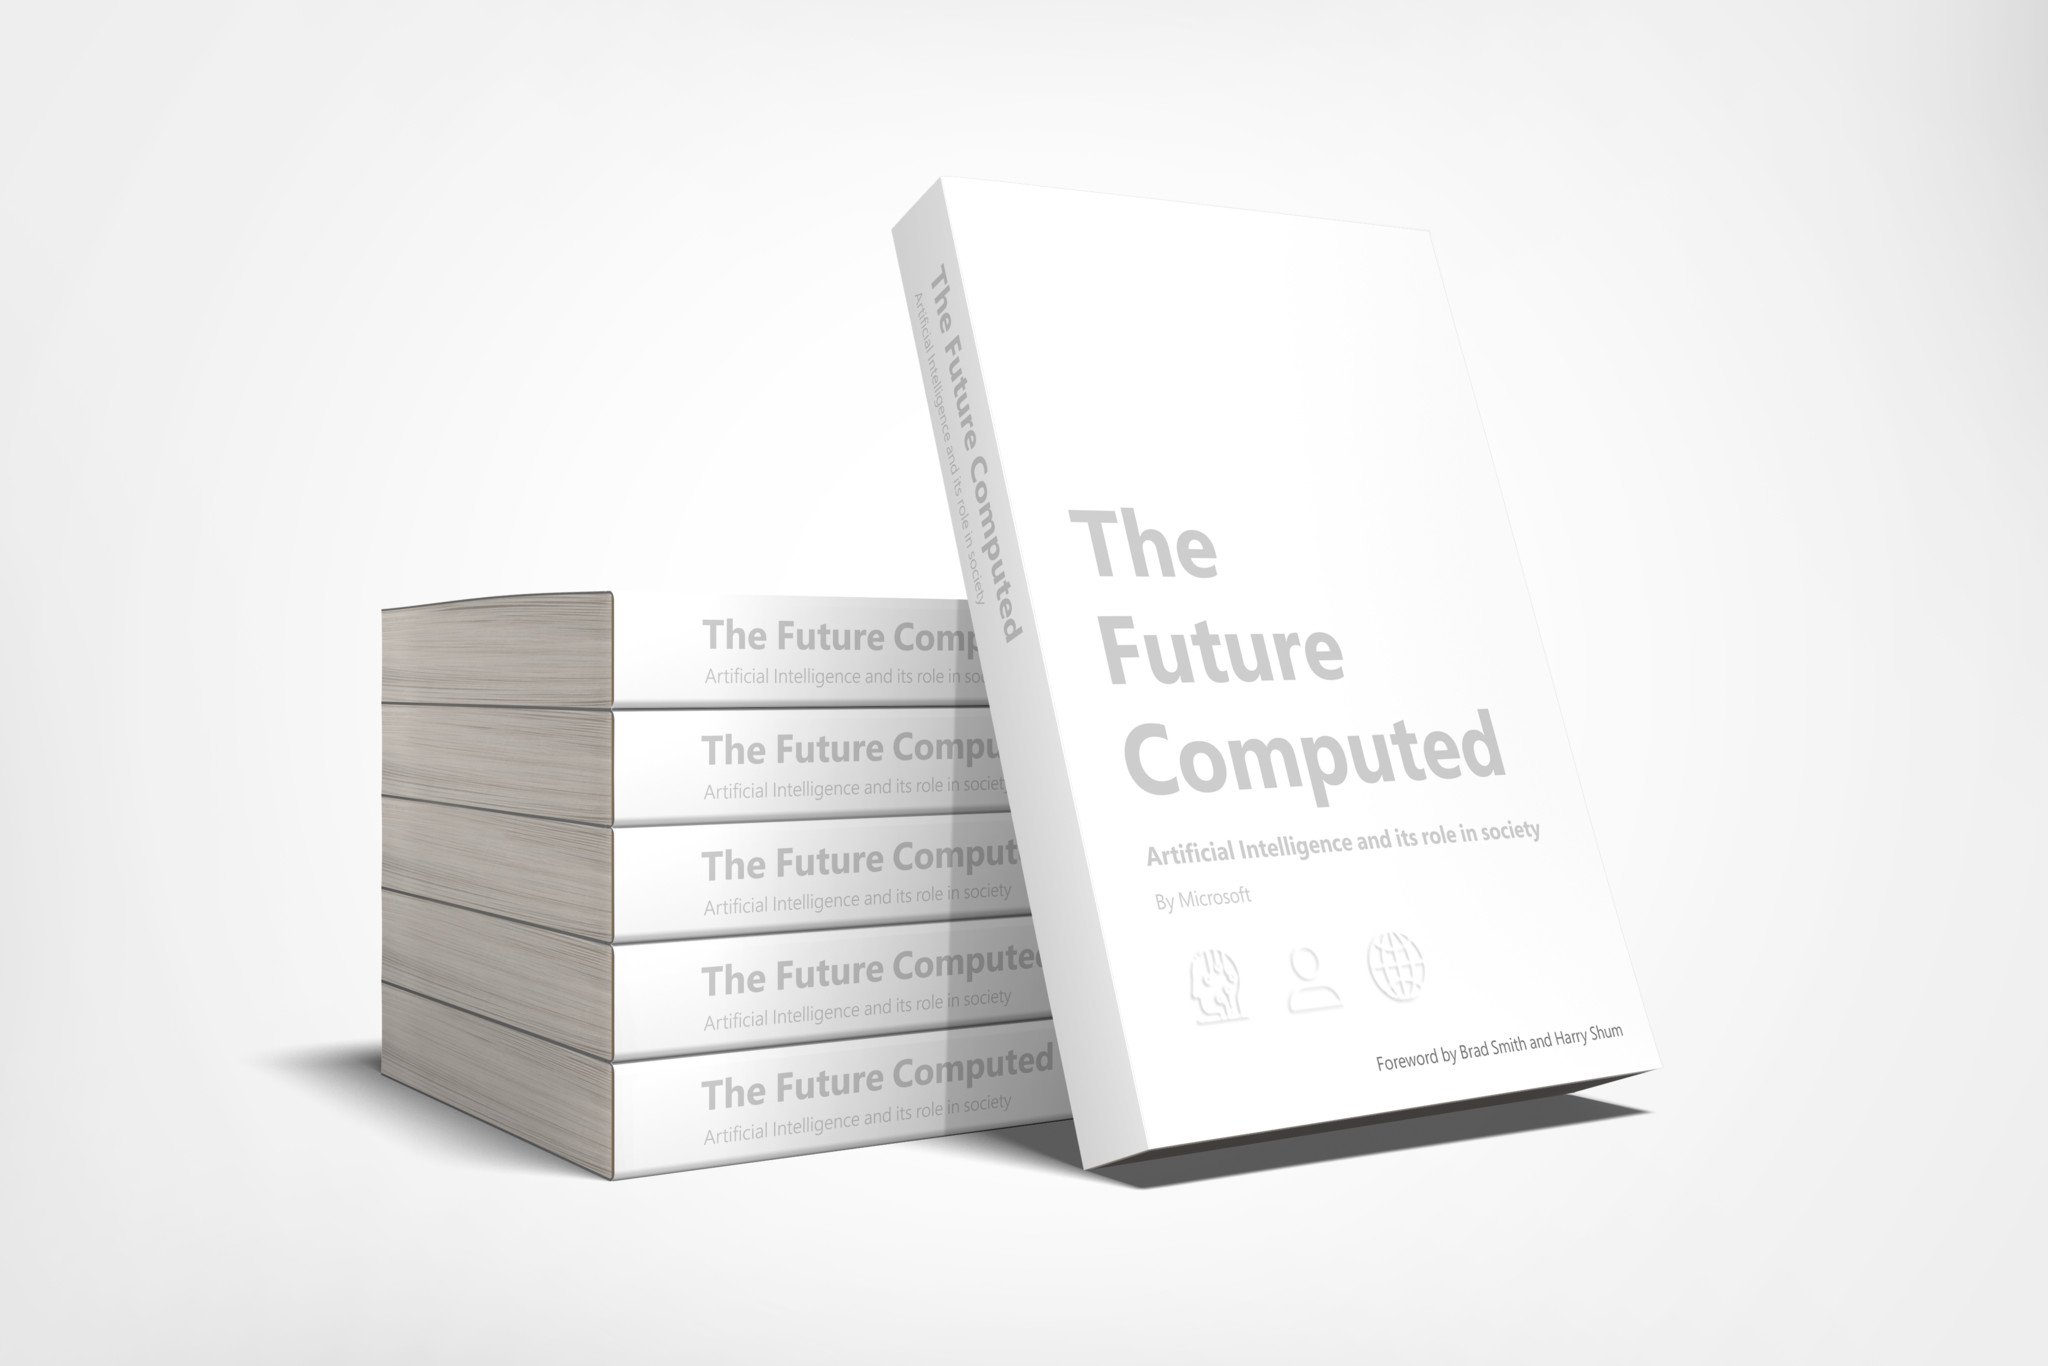 New Microsoft book, &#39;The Future Computed,&#39; examines AI&#39;s role in society